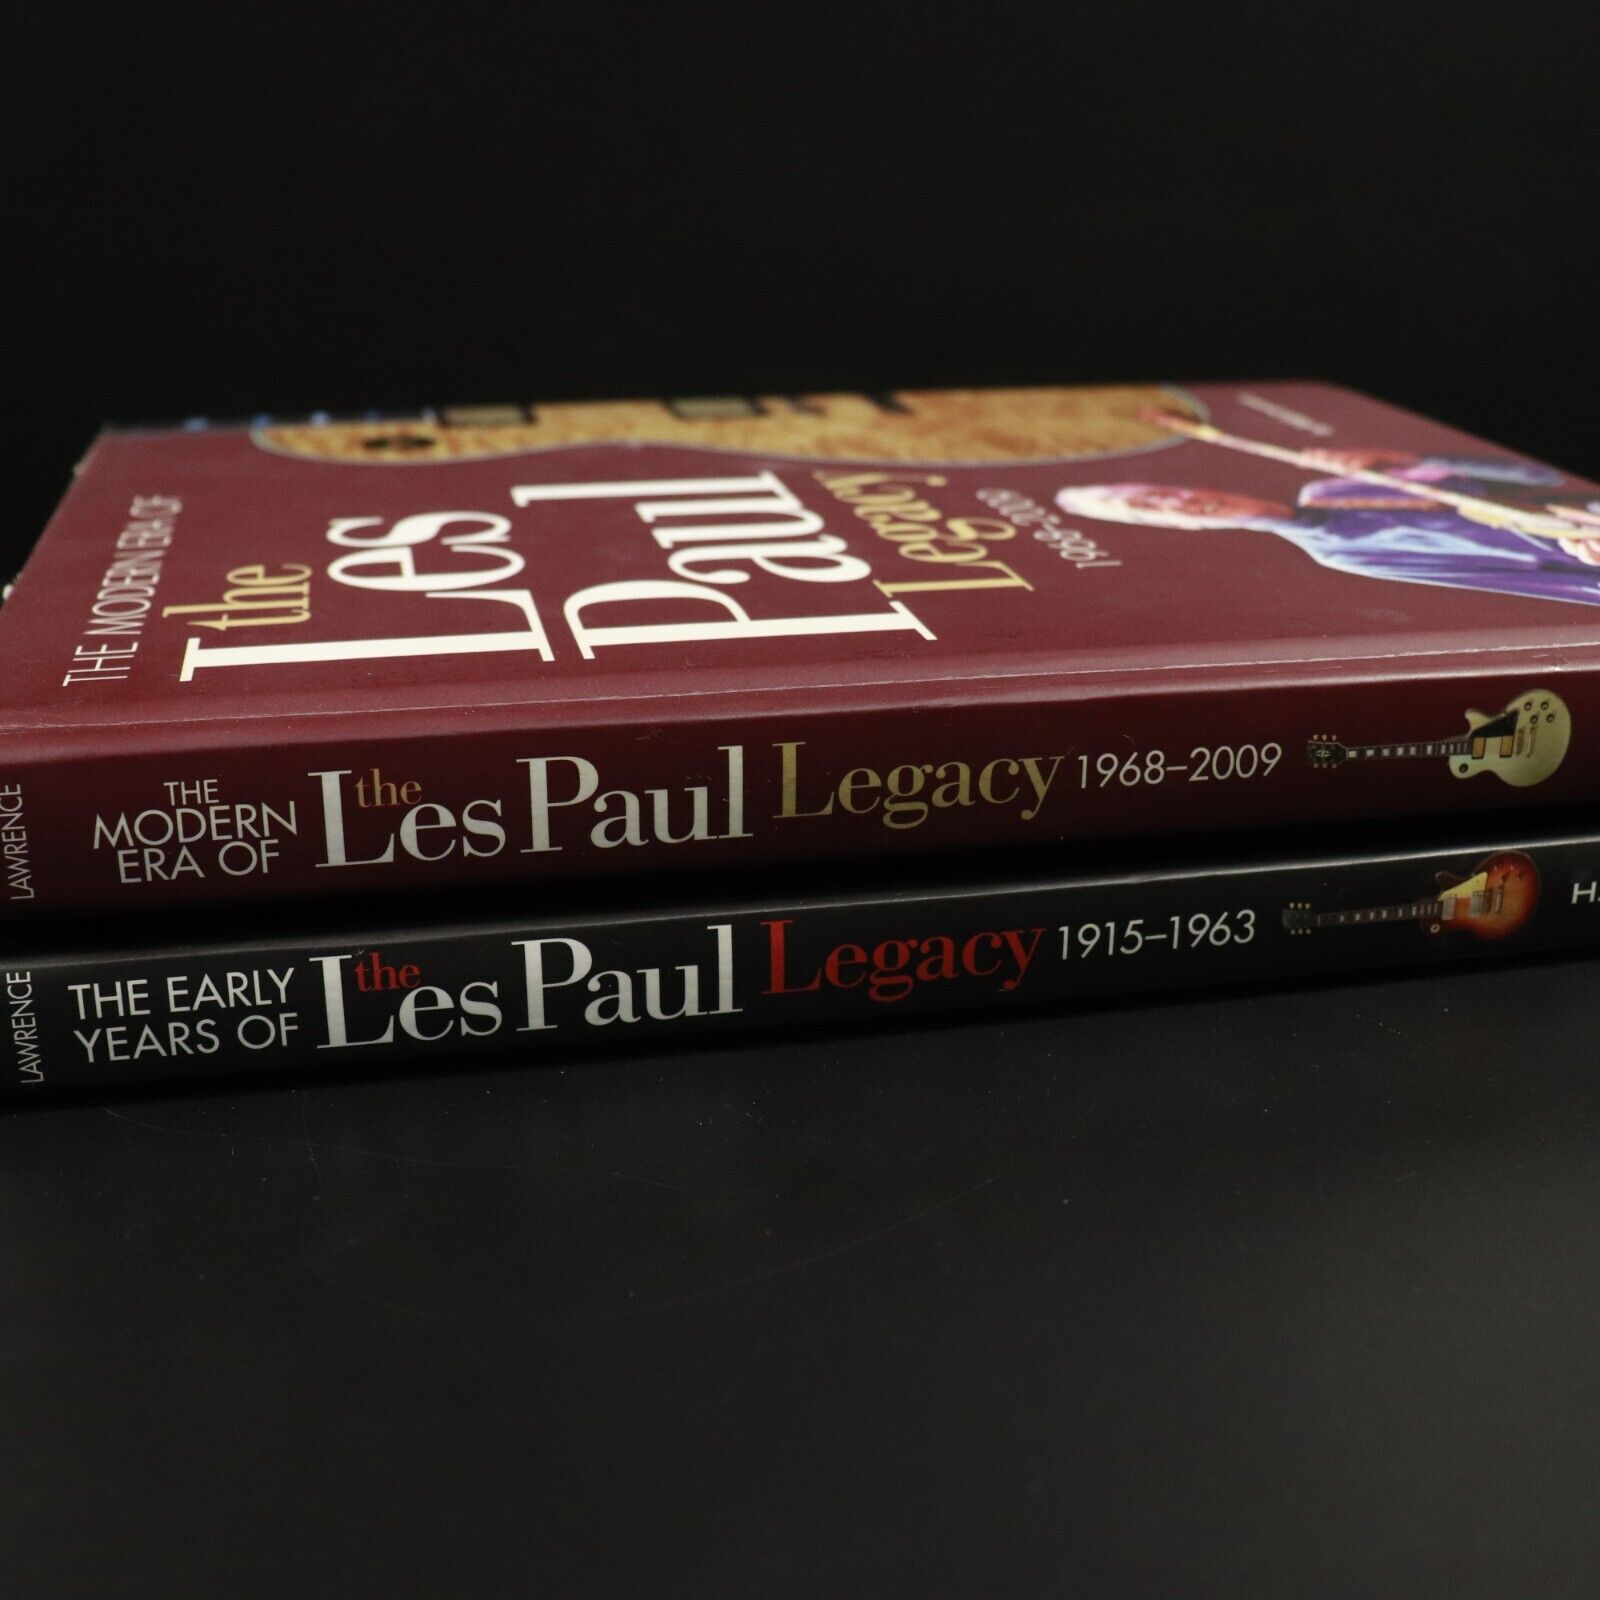 2008/9 2vol The Les Paul Legacy by Robb Lawrence Gibson Guitar History Book Set - 0